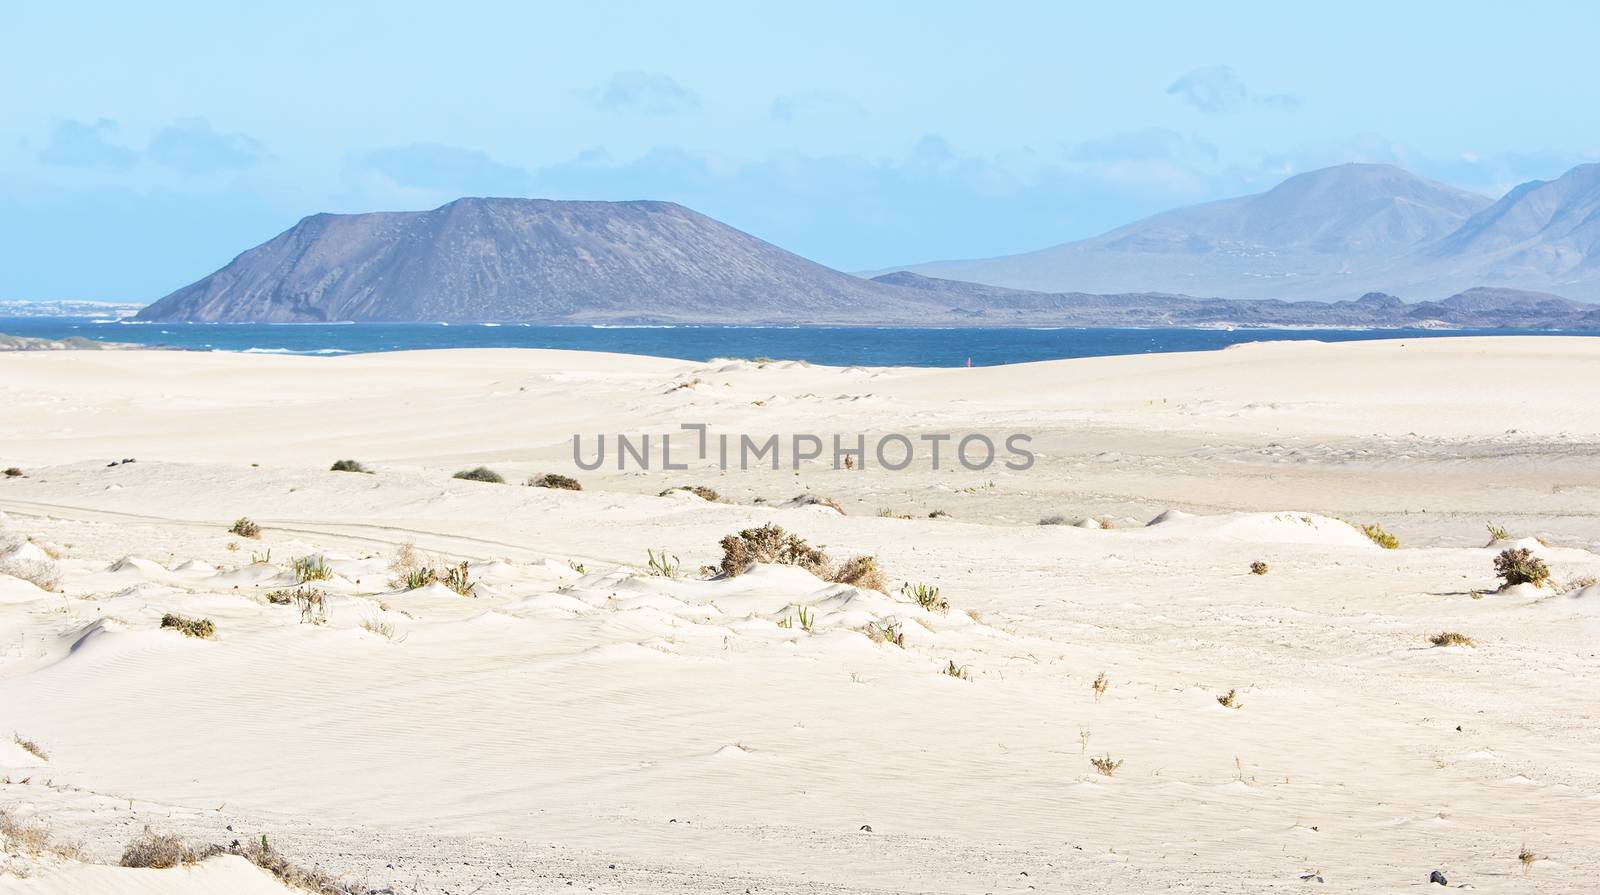 View of the volcano La Caldera on the small island of Los Lobos as seen from the dunes of Corralejo in the north east of Fuerteventura.